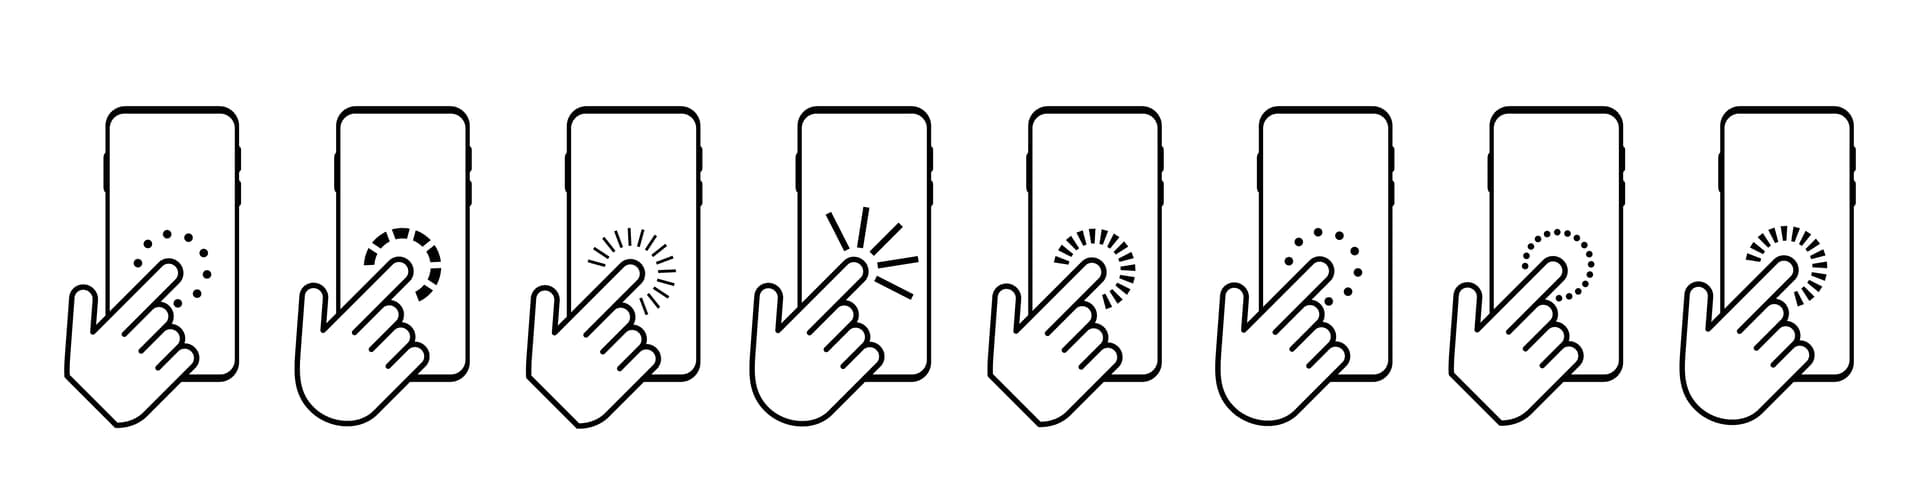 Illustration showing fingers tapping on mobile screens